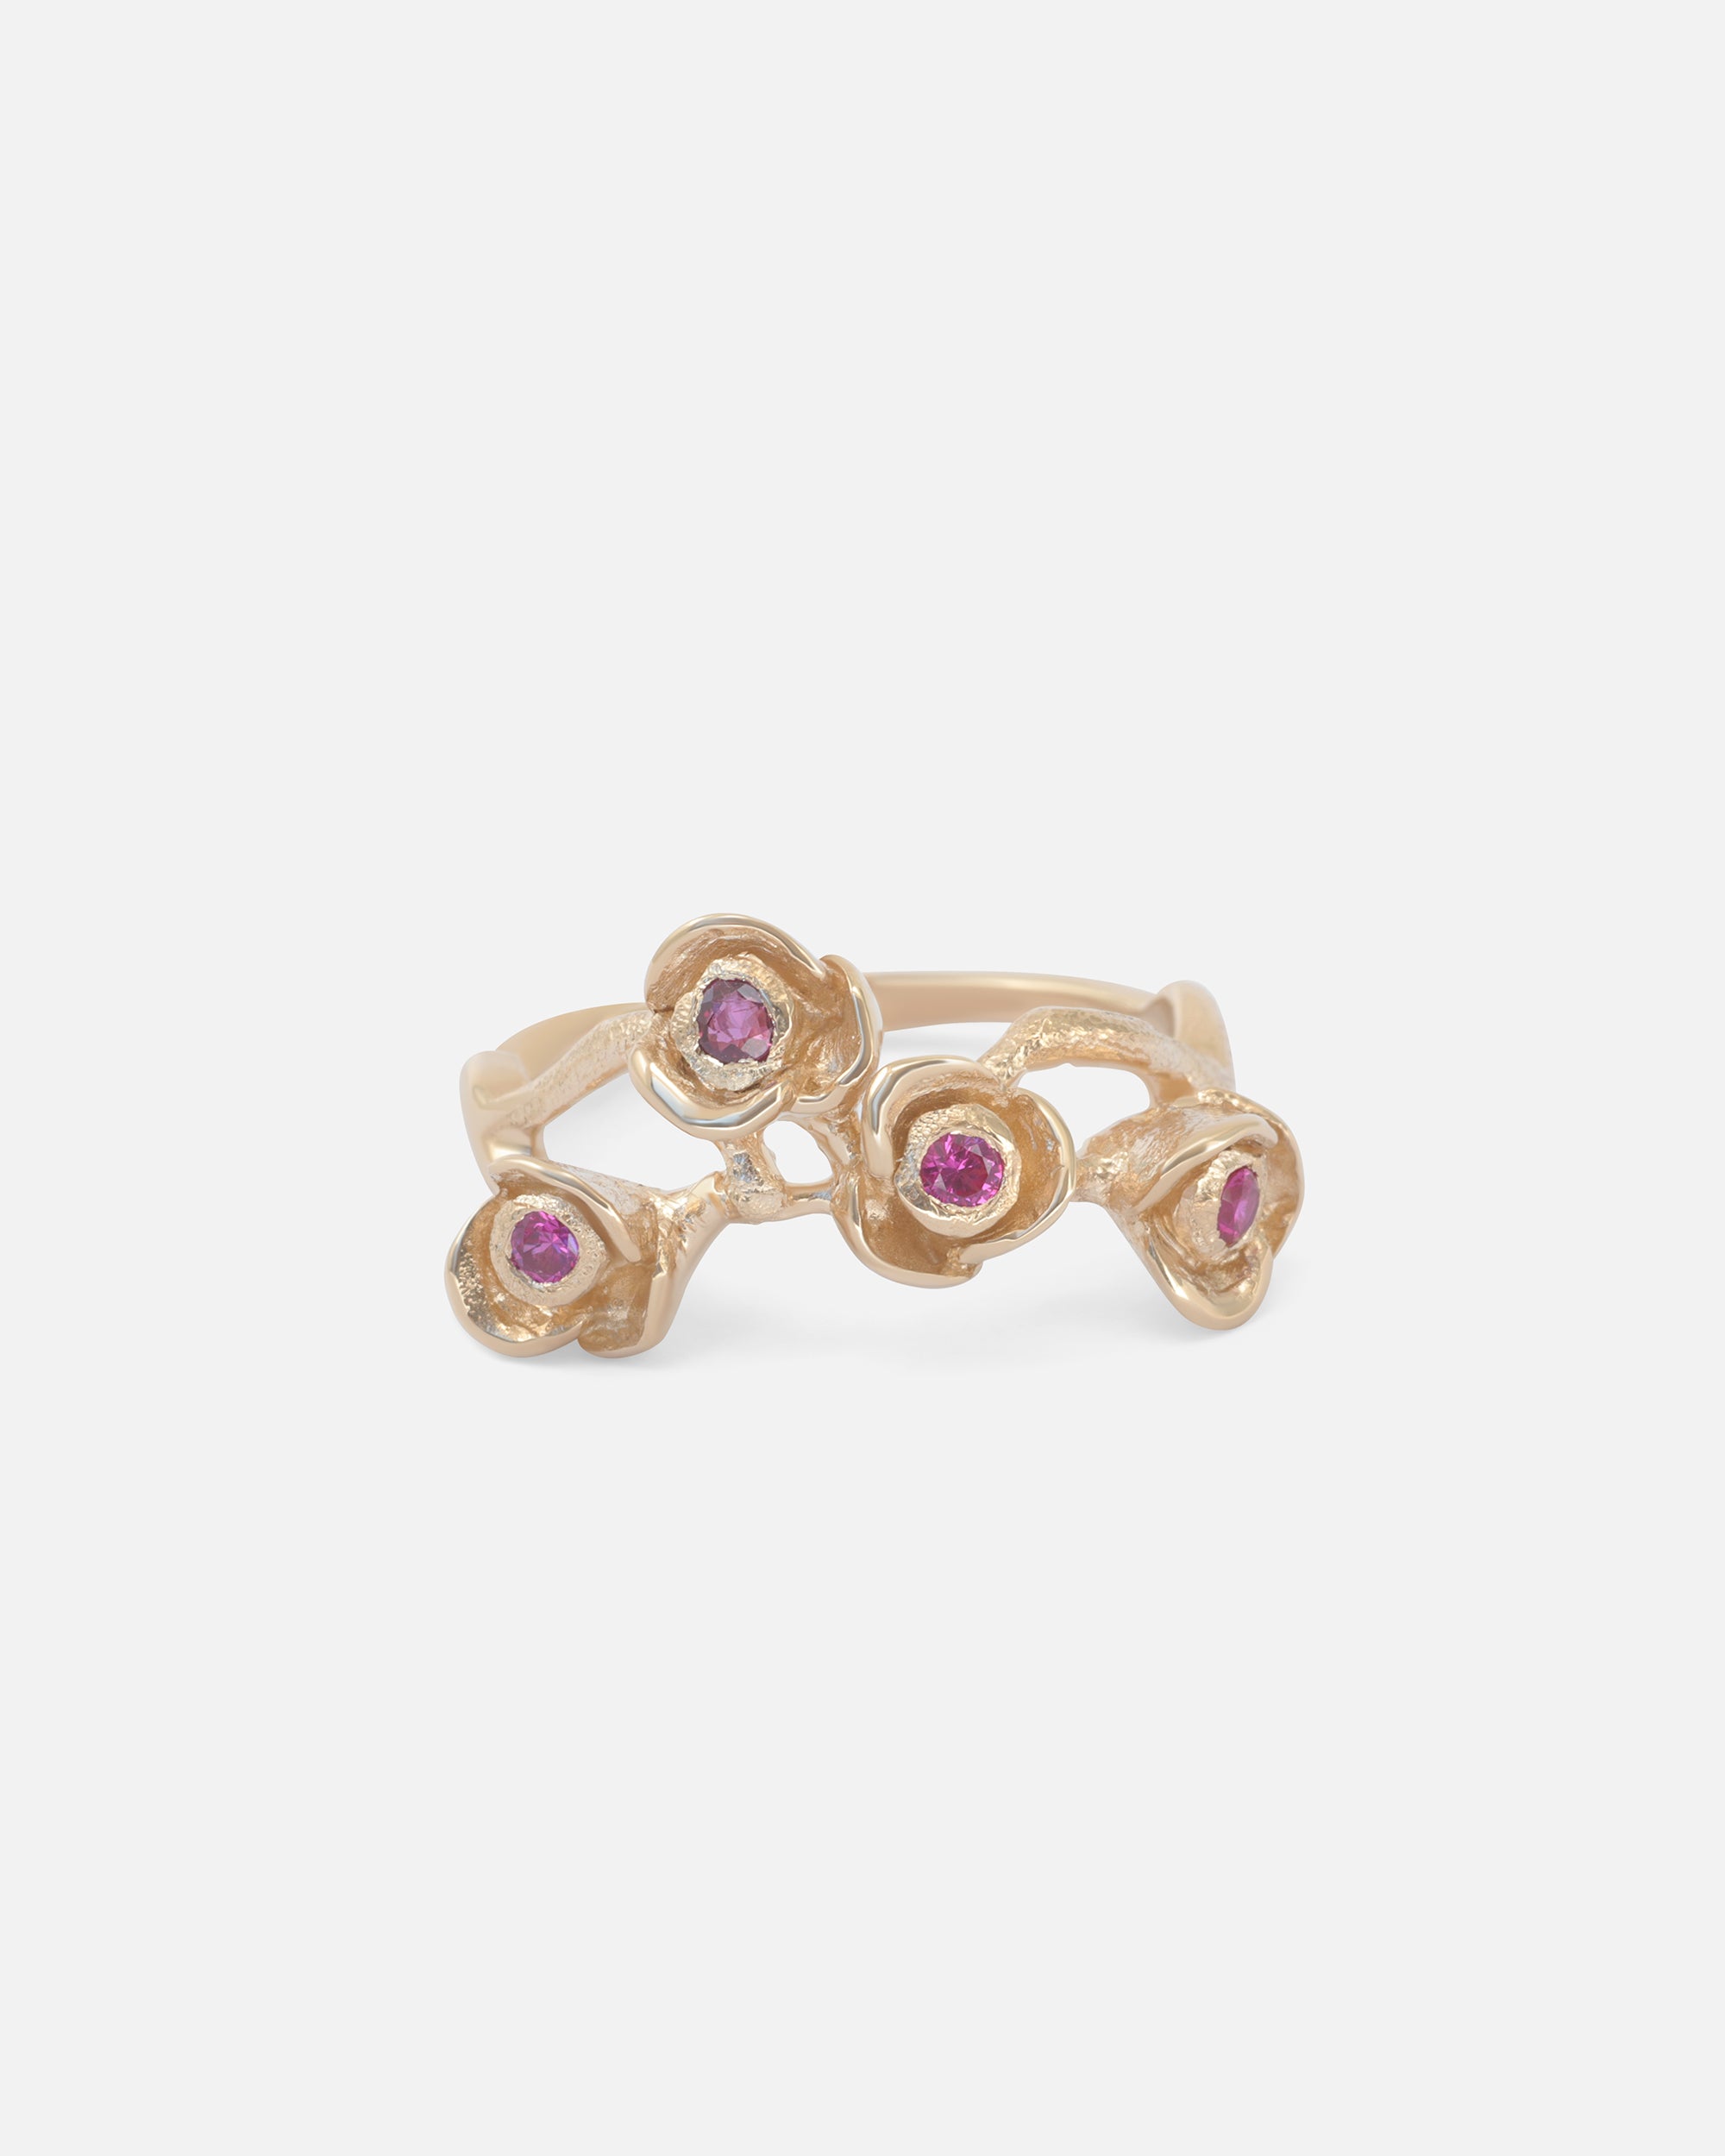 Ruby Rose Water Ring By Young Sun Song in rings Category